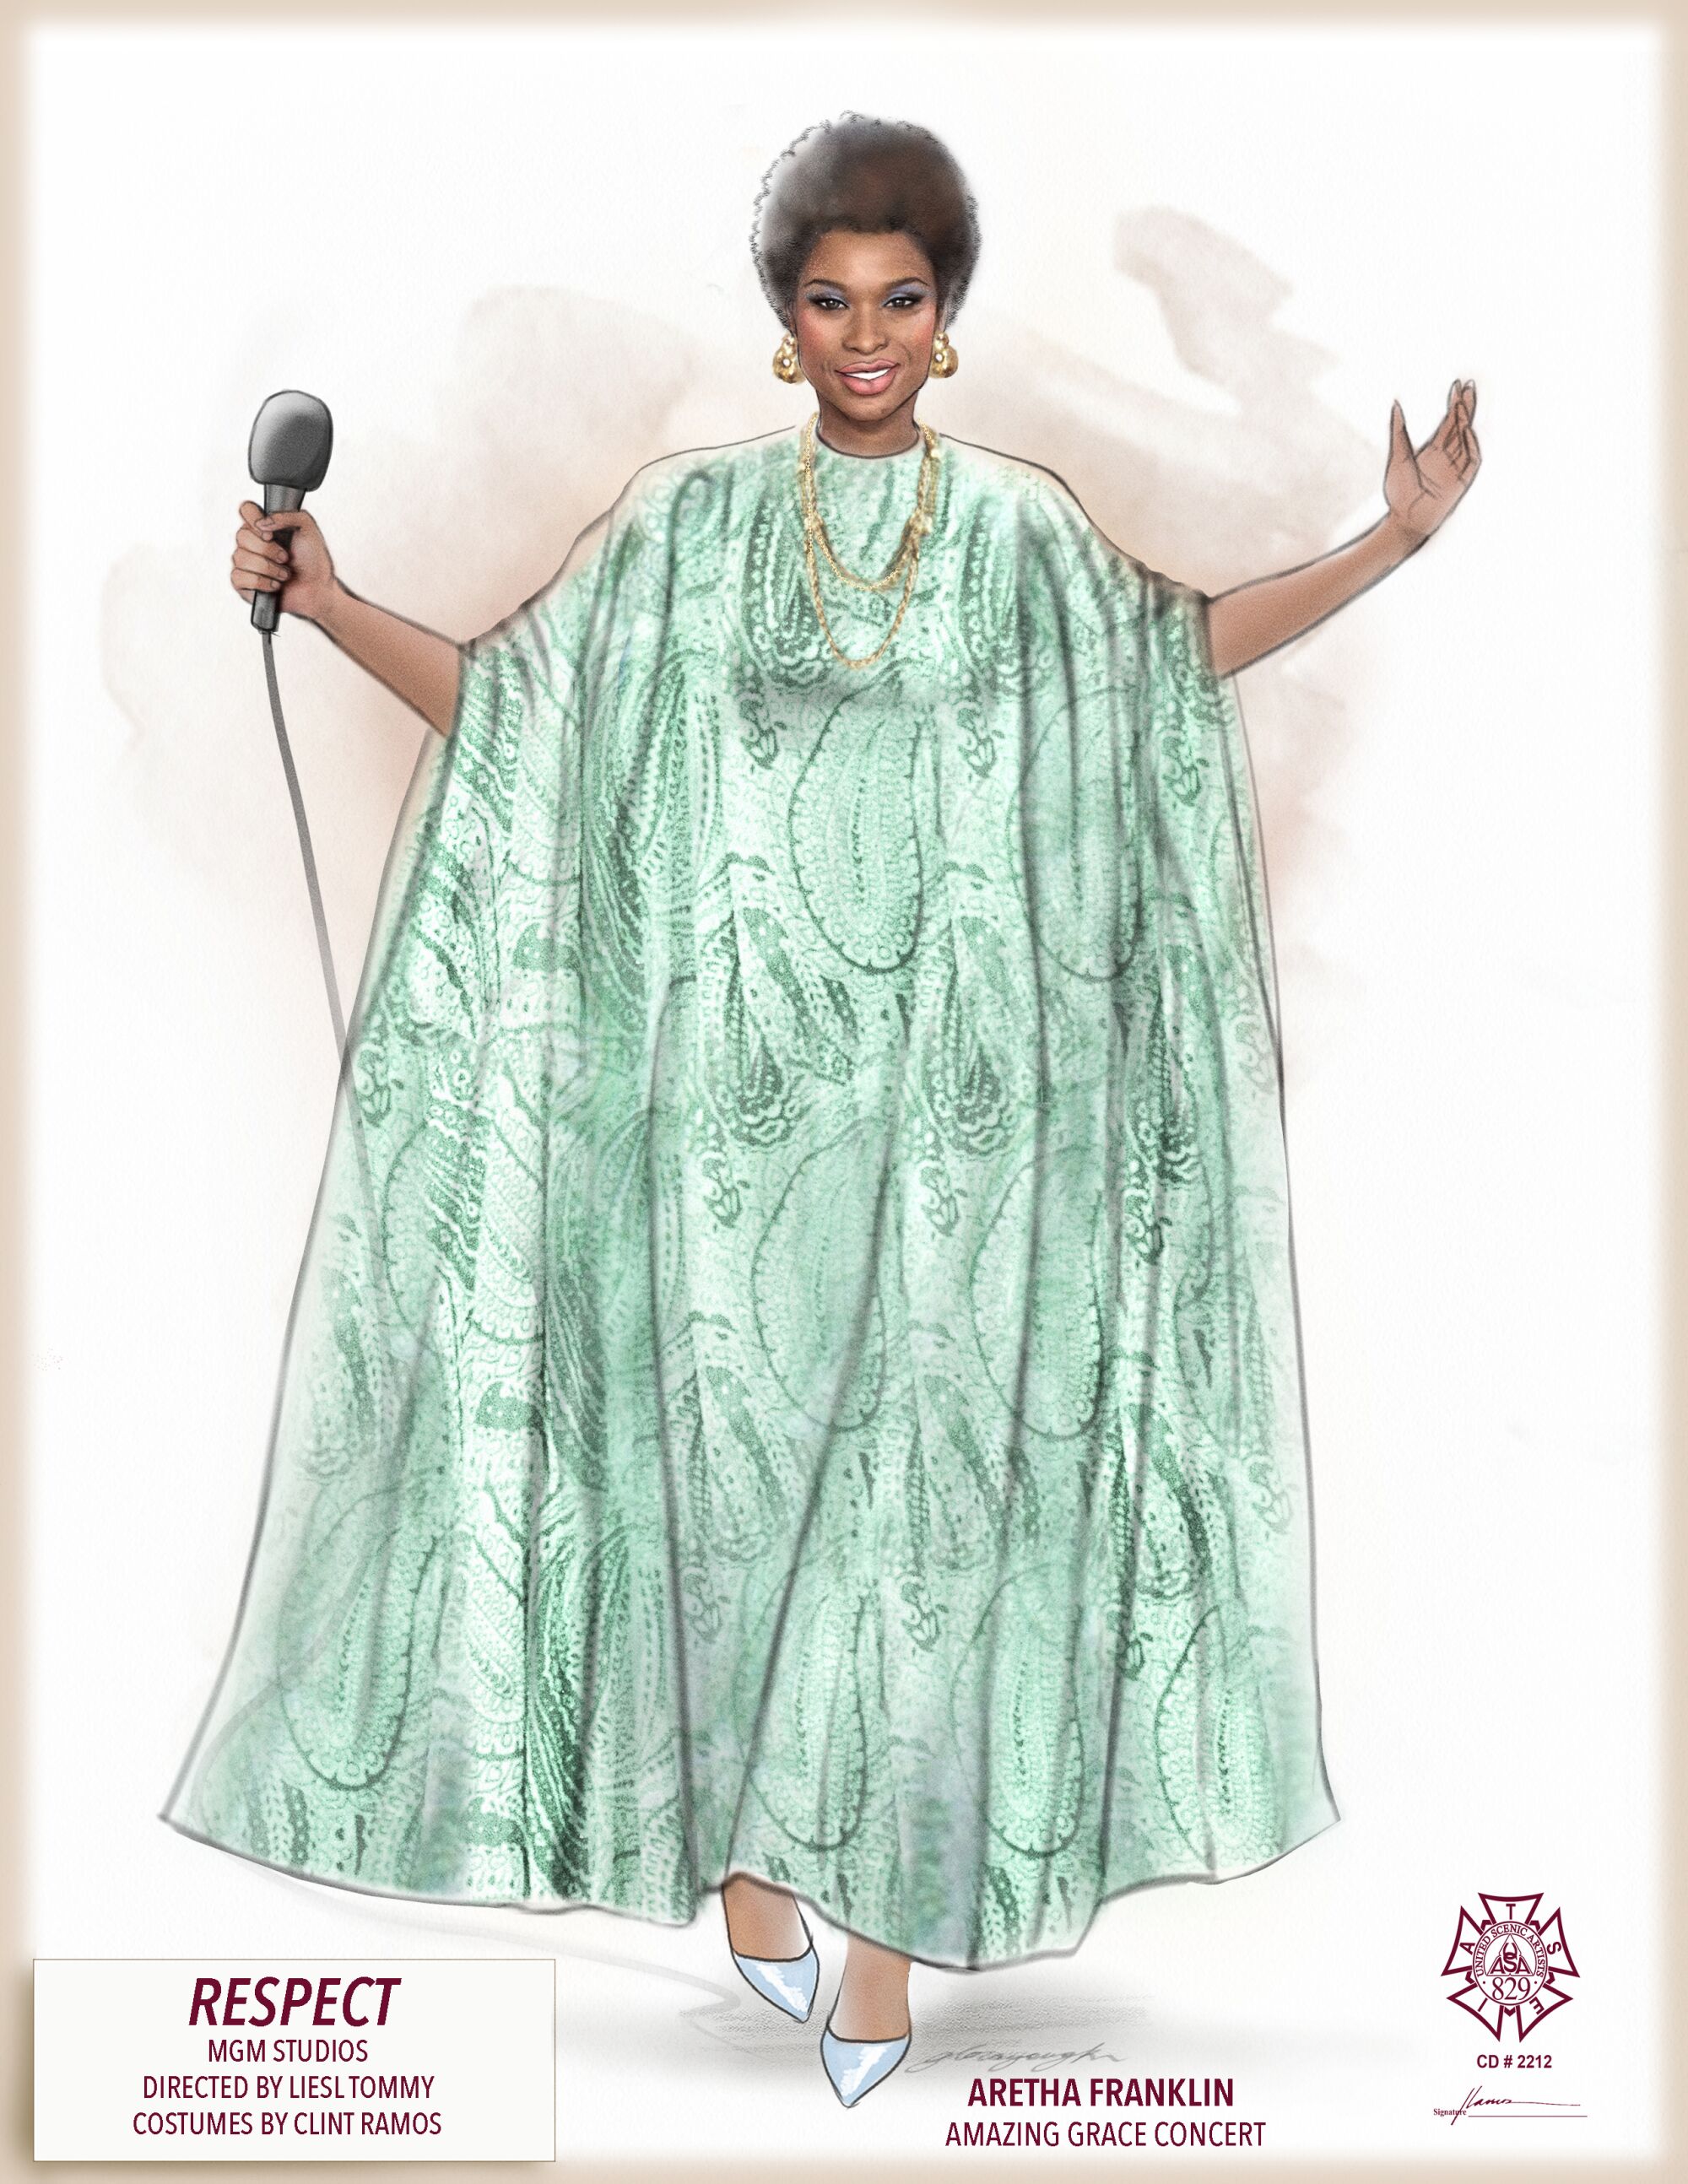 A sketch of Jennifer Hudson in a flowing aqua gown for the "Amazing Grace" concert.